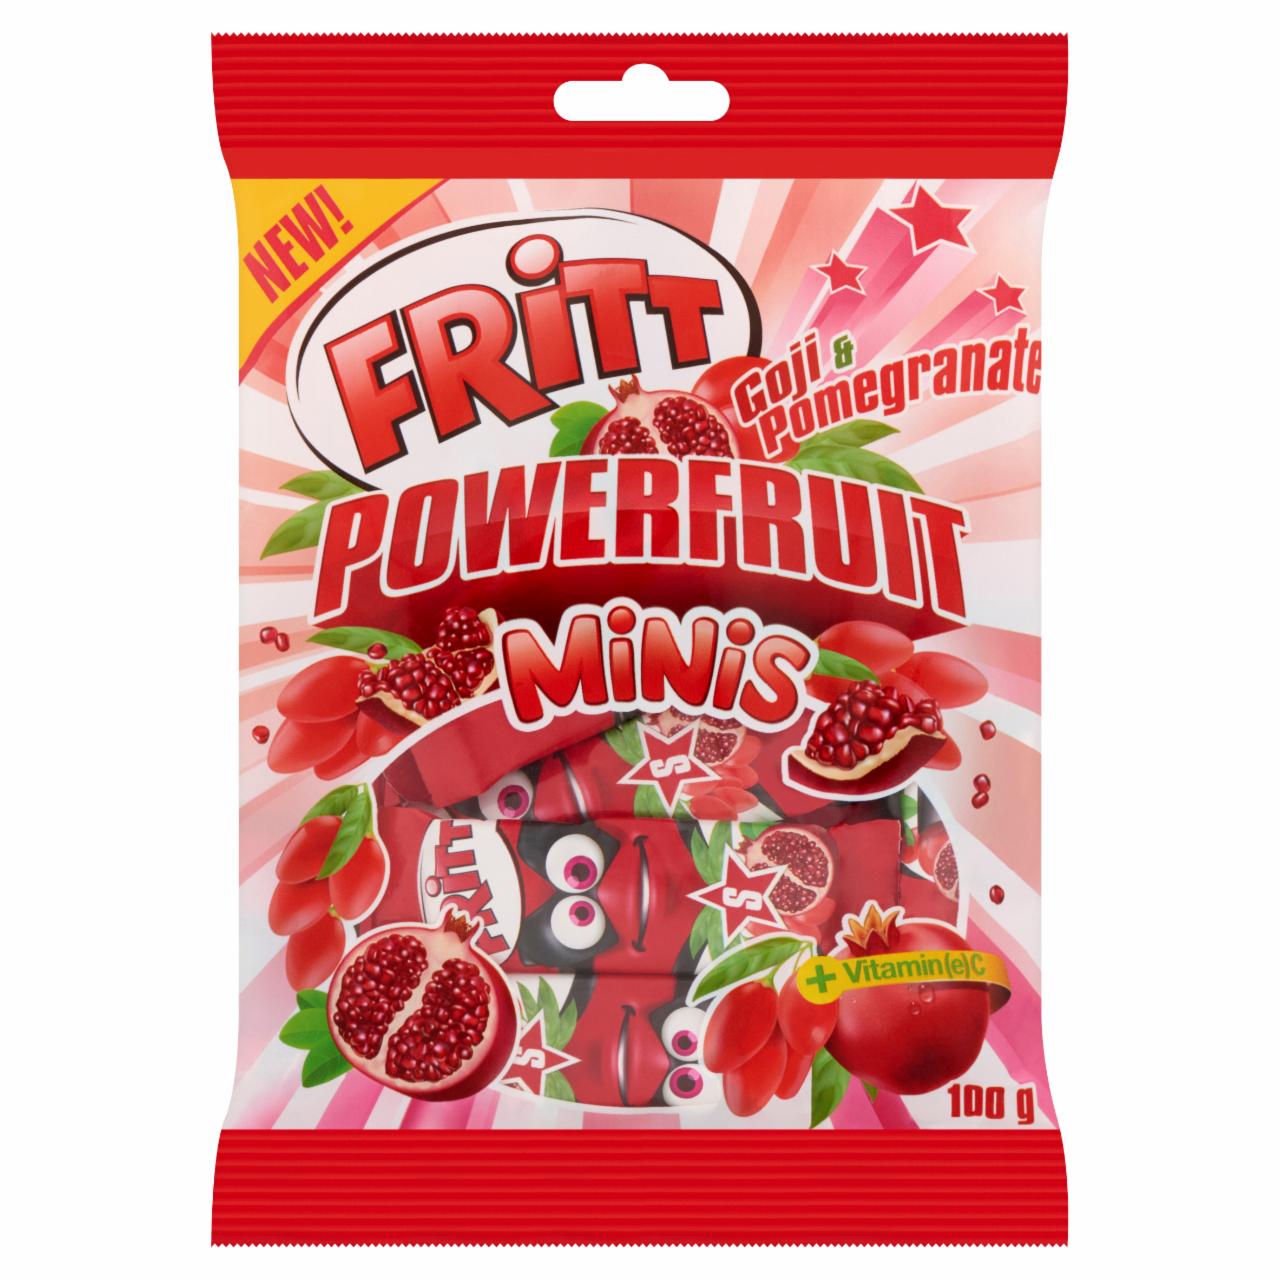 Photo - Fritt Powerfruit Minis Chewy Candy with Goji & Pomegranate Flavour + Vitamin C 100 g